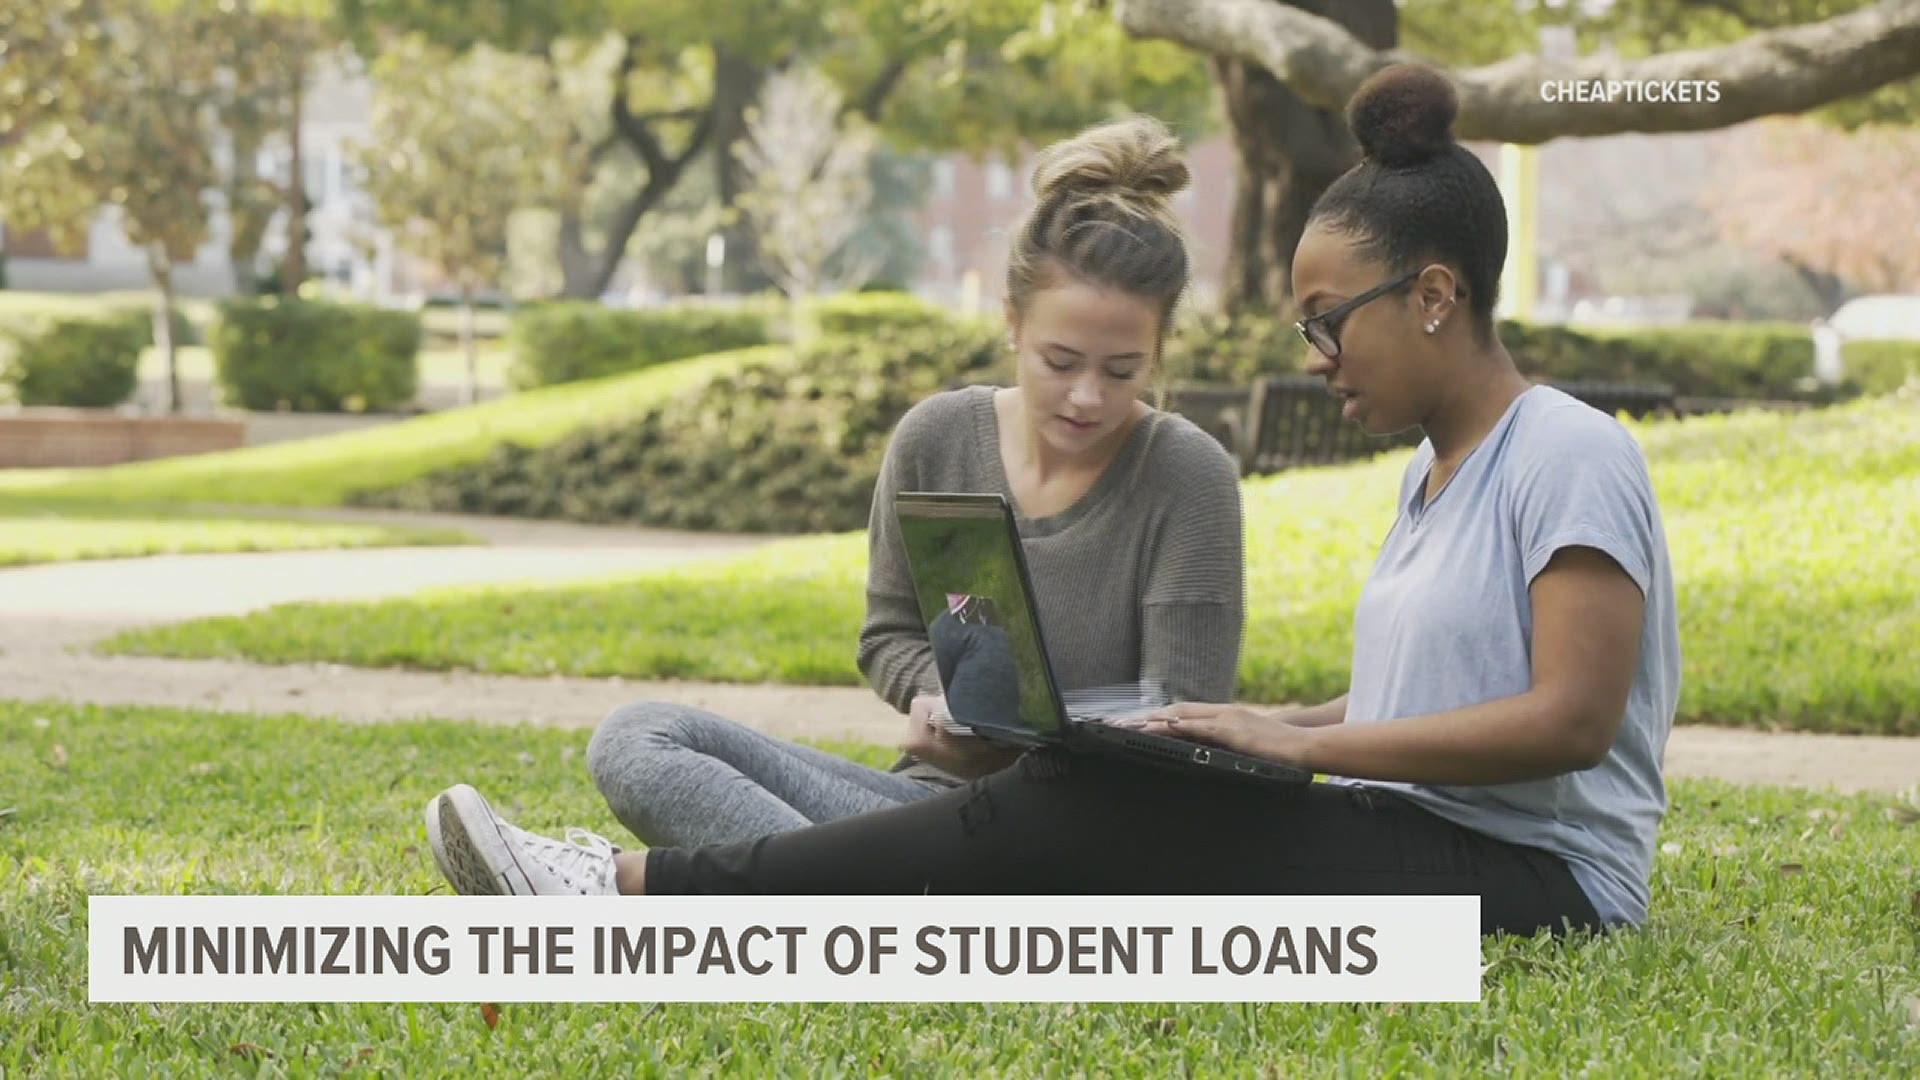 Money and Career Expert, Tori Dunlap, joined FOX43 on June 2 to share her tips for pulling yourself out of student debt.